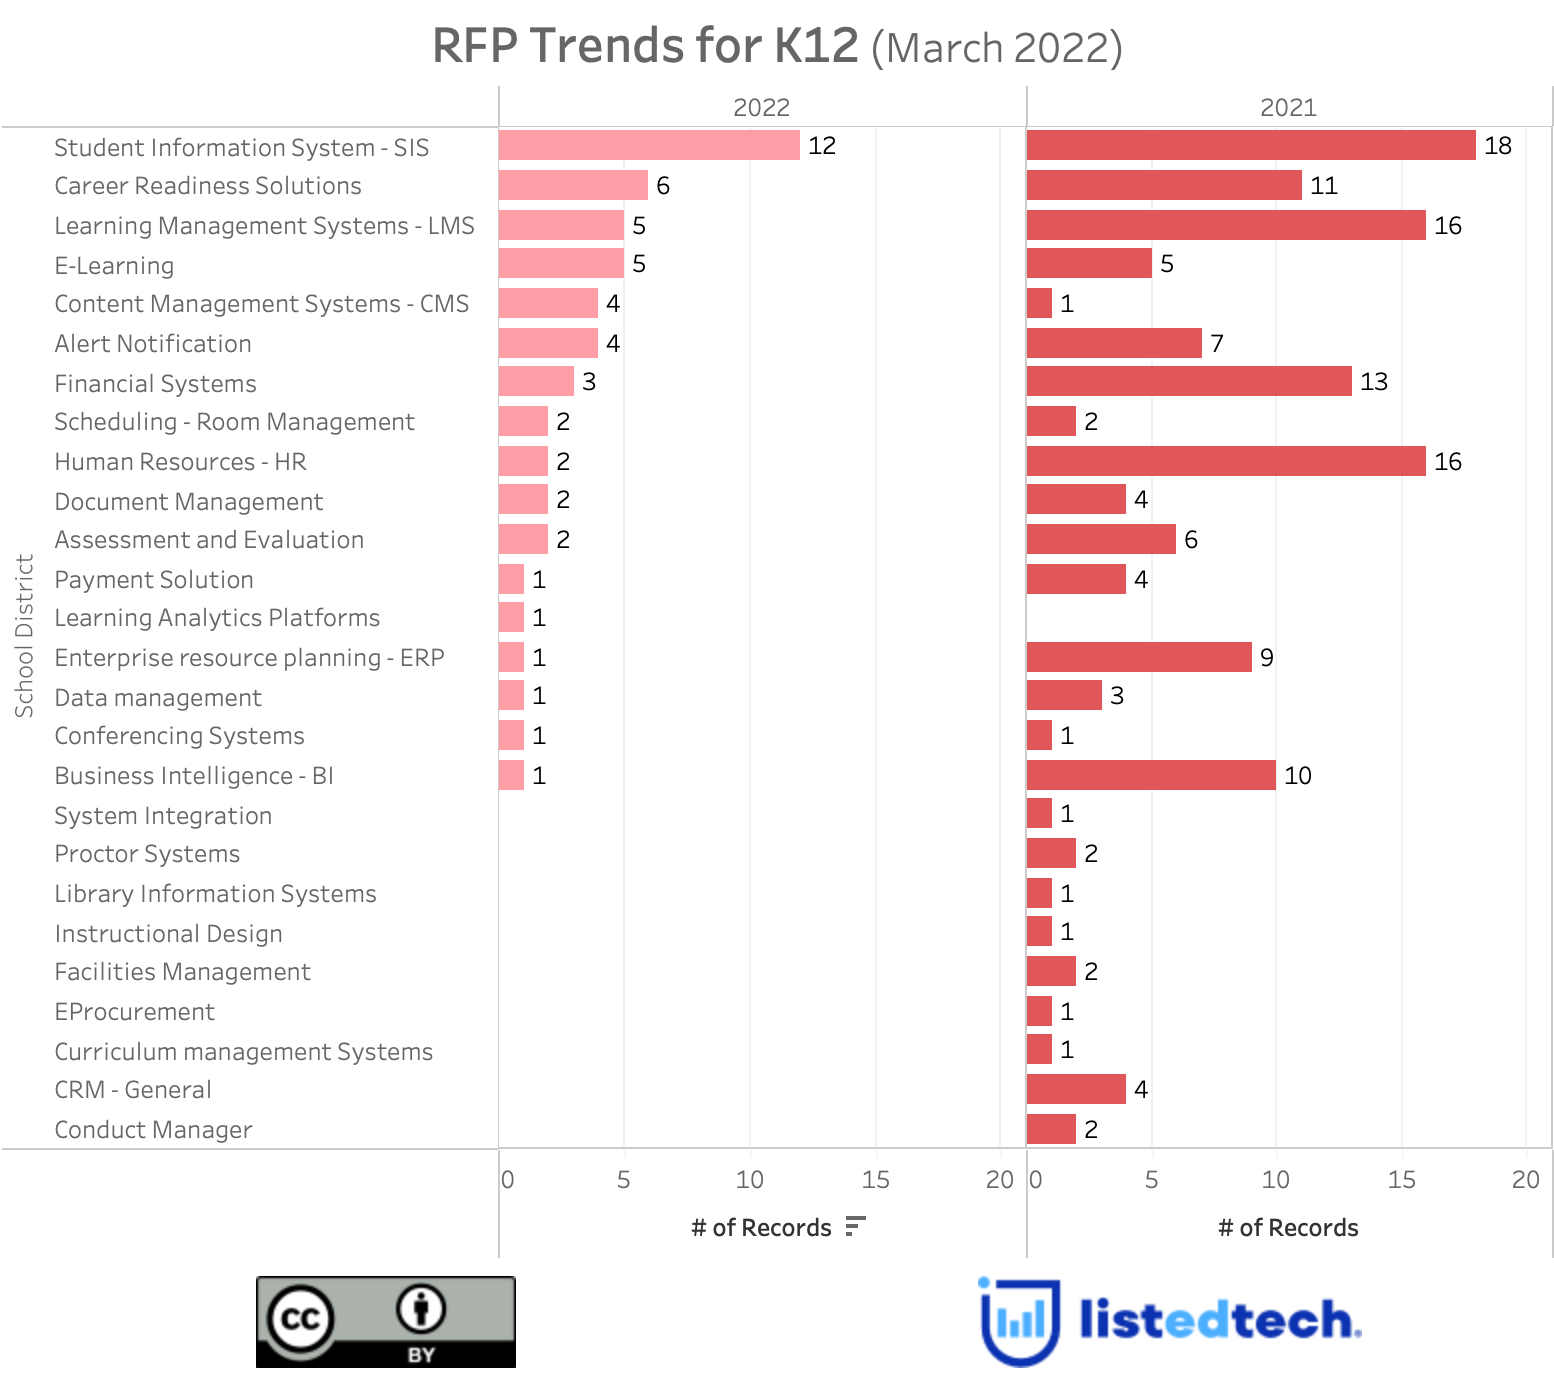 RRP Trends for K-12 - March 2022